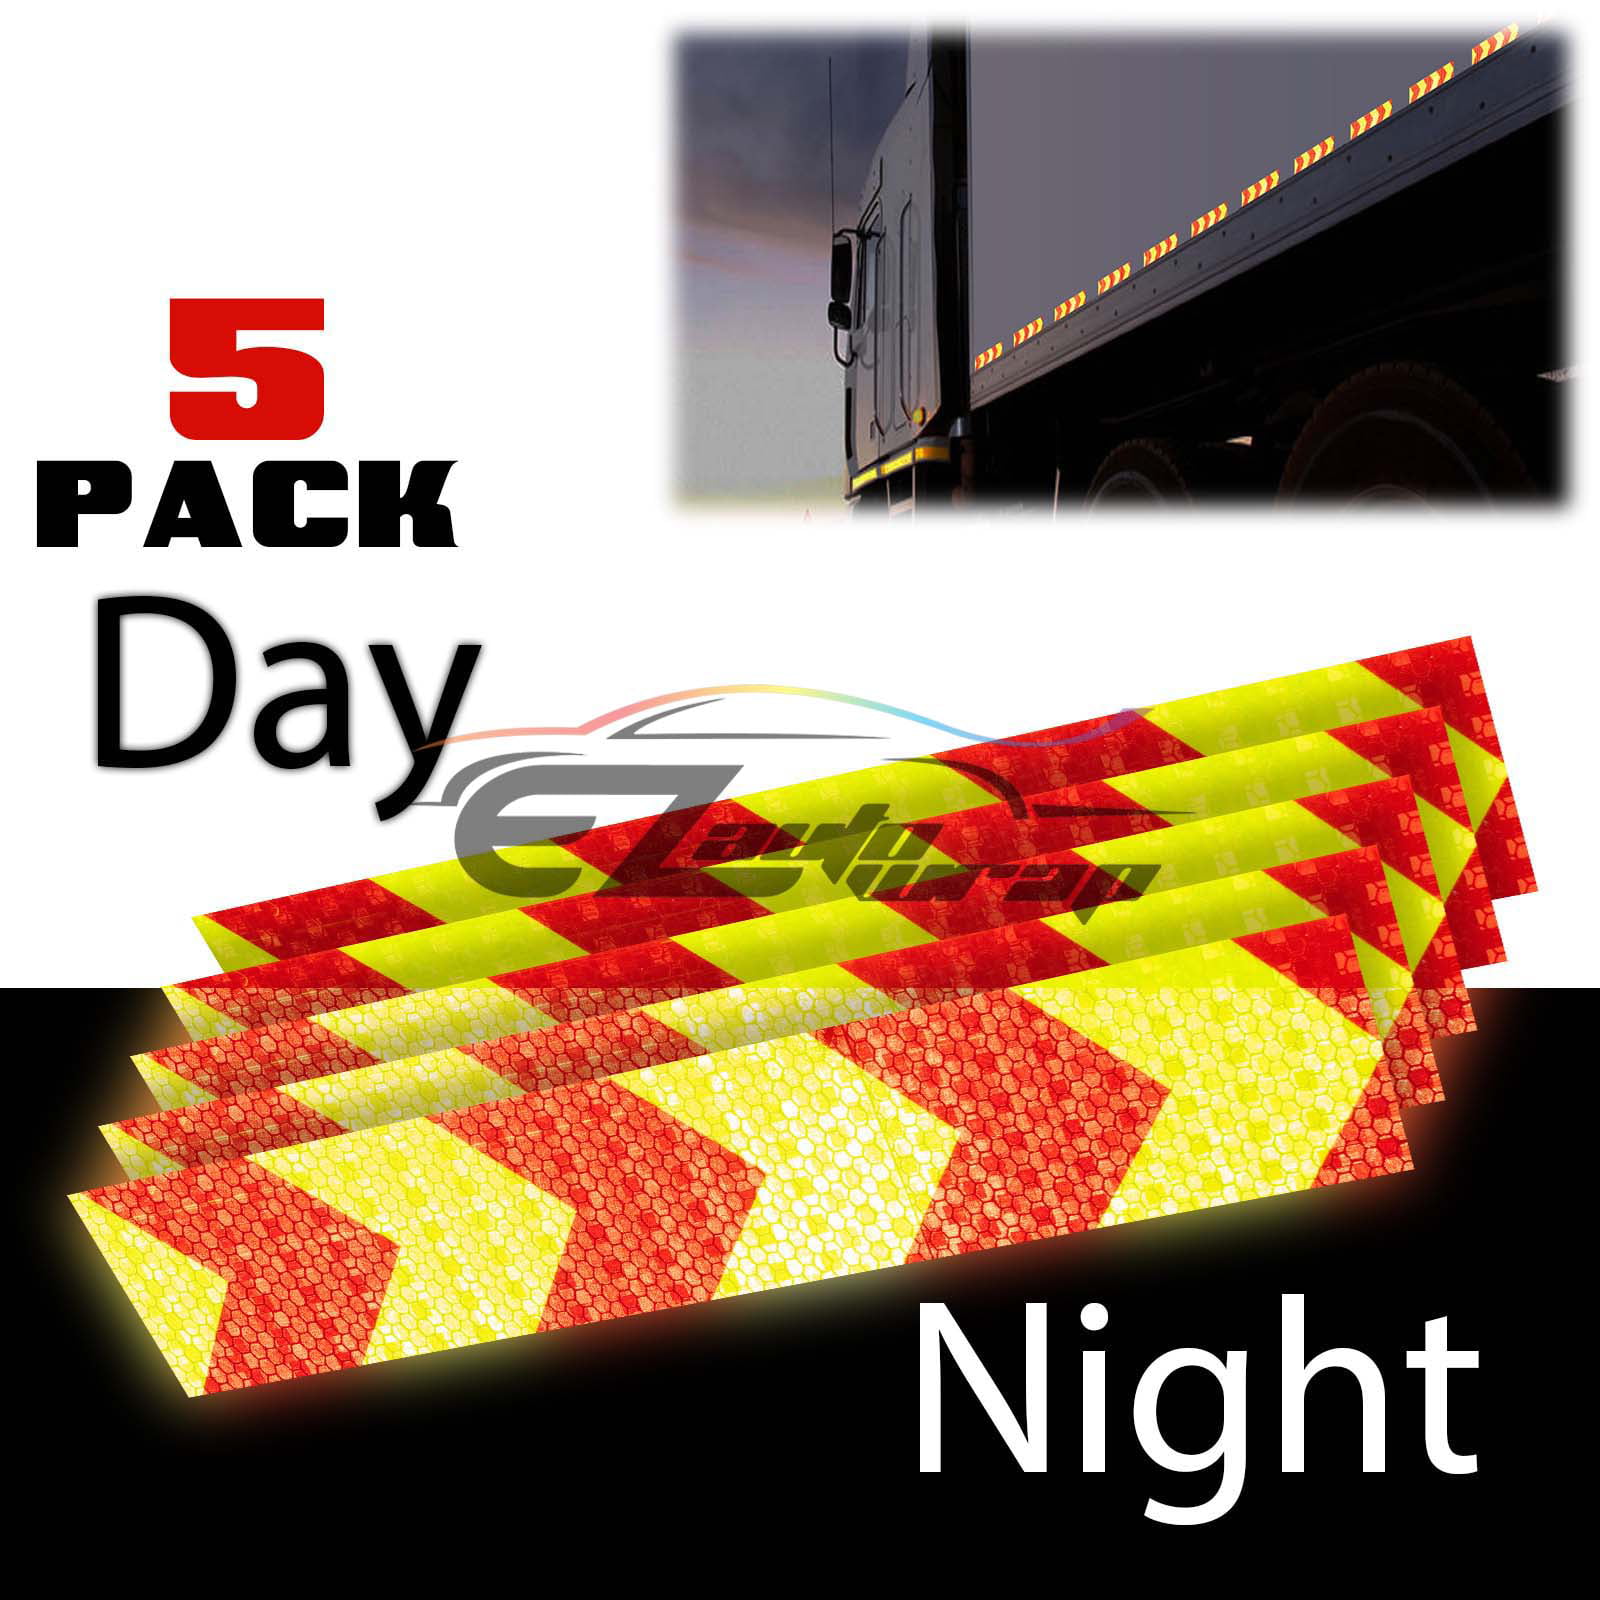 Conspicuity Arrow Reflective Tape Stripe Safety Warning Decor Trailer M1V2 